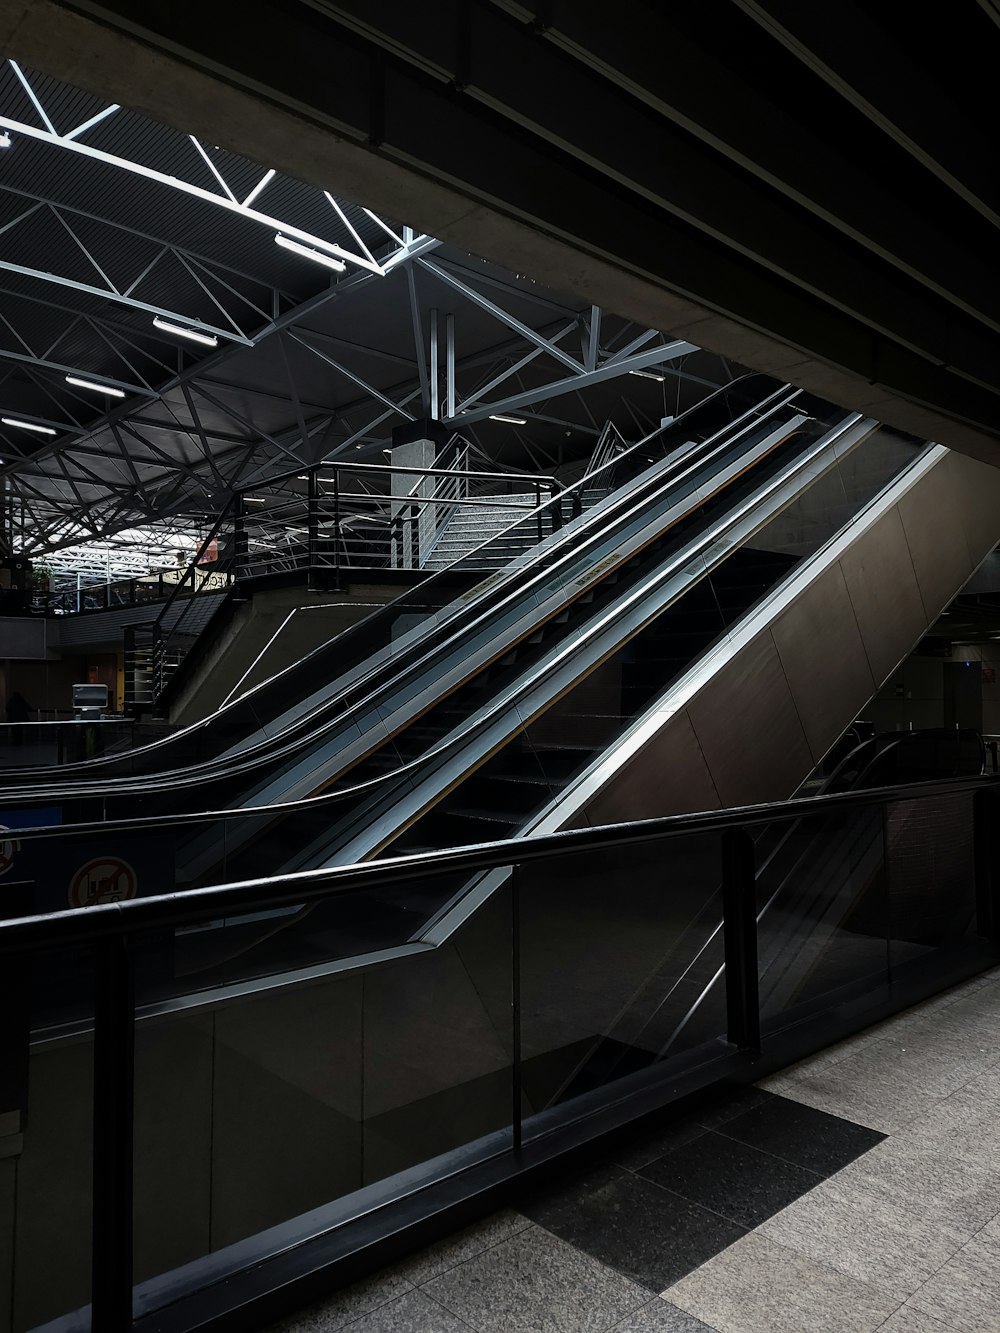 an escalator in a subway station with metal railings